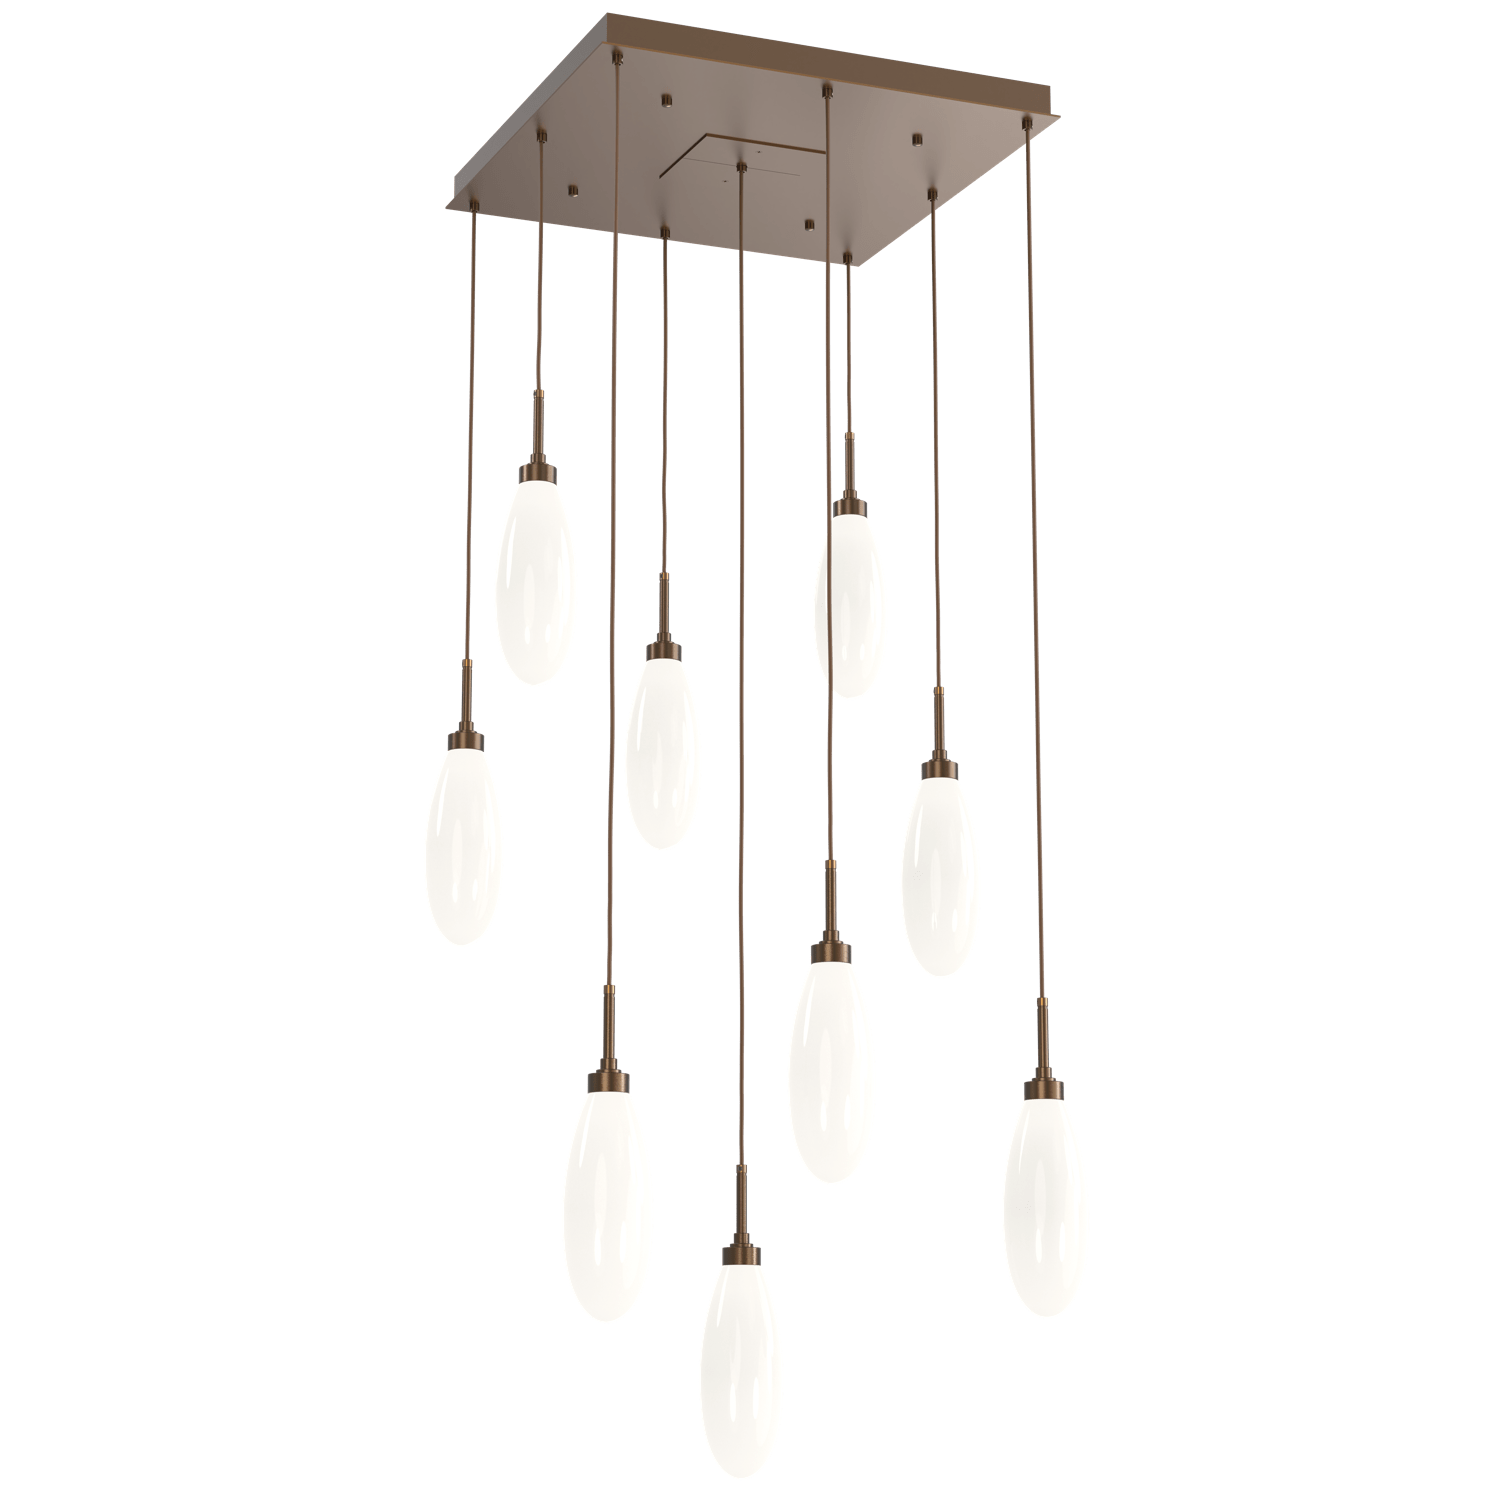 CHB0071-09-FB-WL-LL-Hammerton-Studio-Fiori-9-light-square-pendant-chandelier-with-flat-bronze-finish-and-opal-white-glass-shades-and-LED-lamping